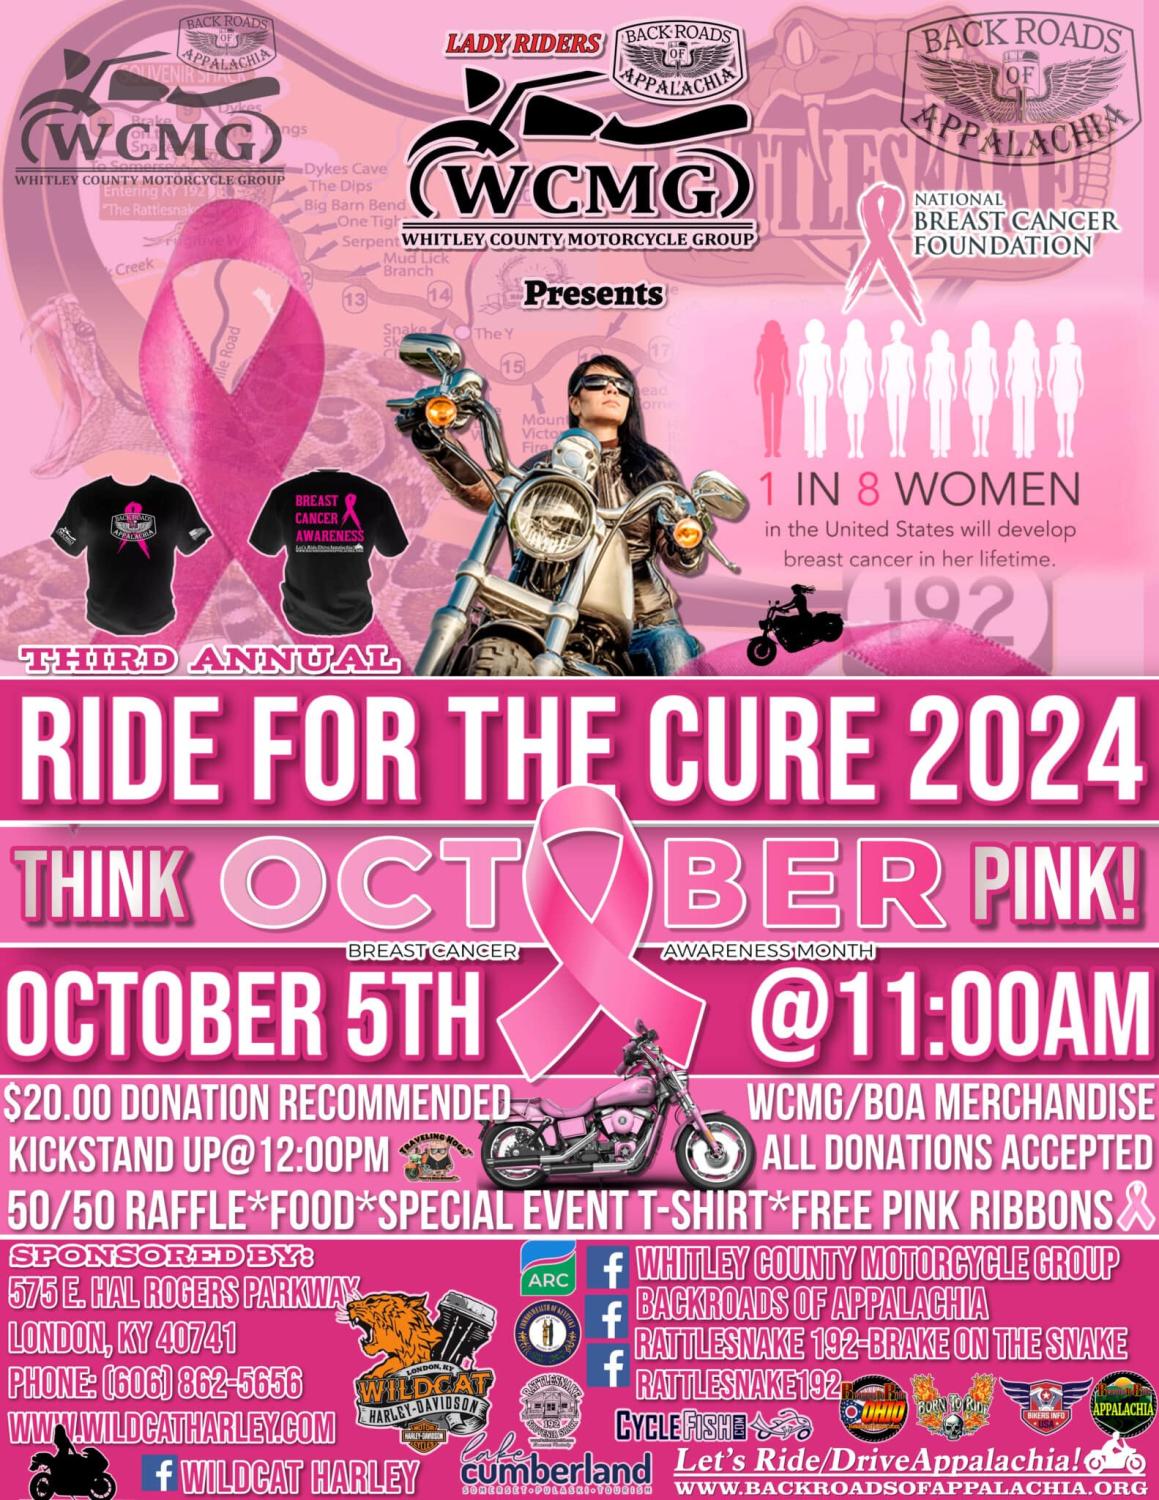 WCMG Lady Riders “Ride for the Cure 2024” with Wildcat HD